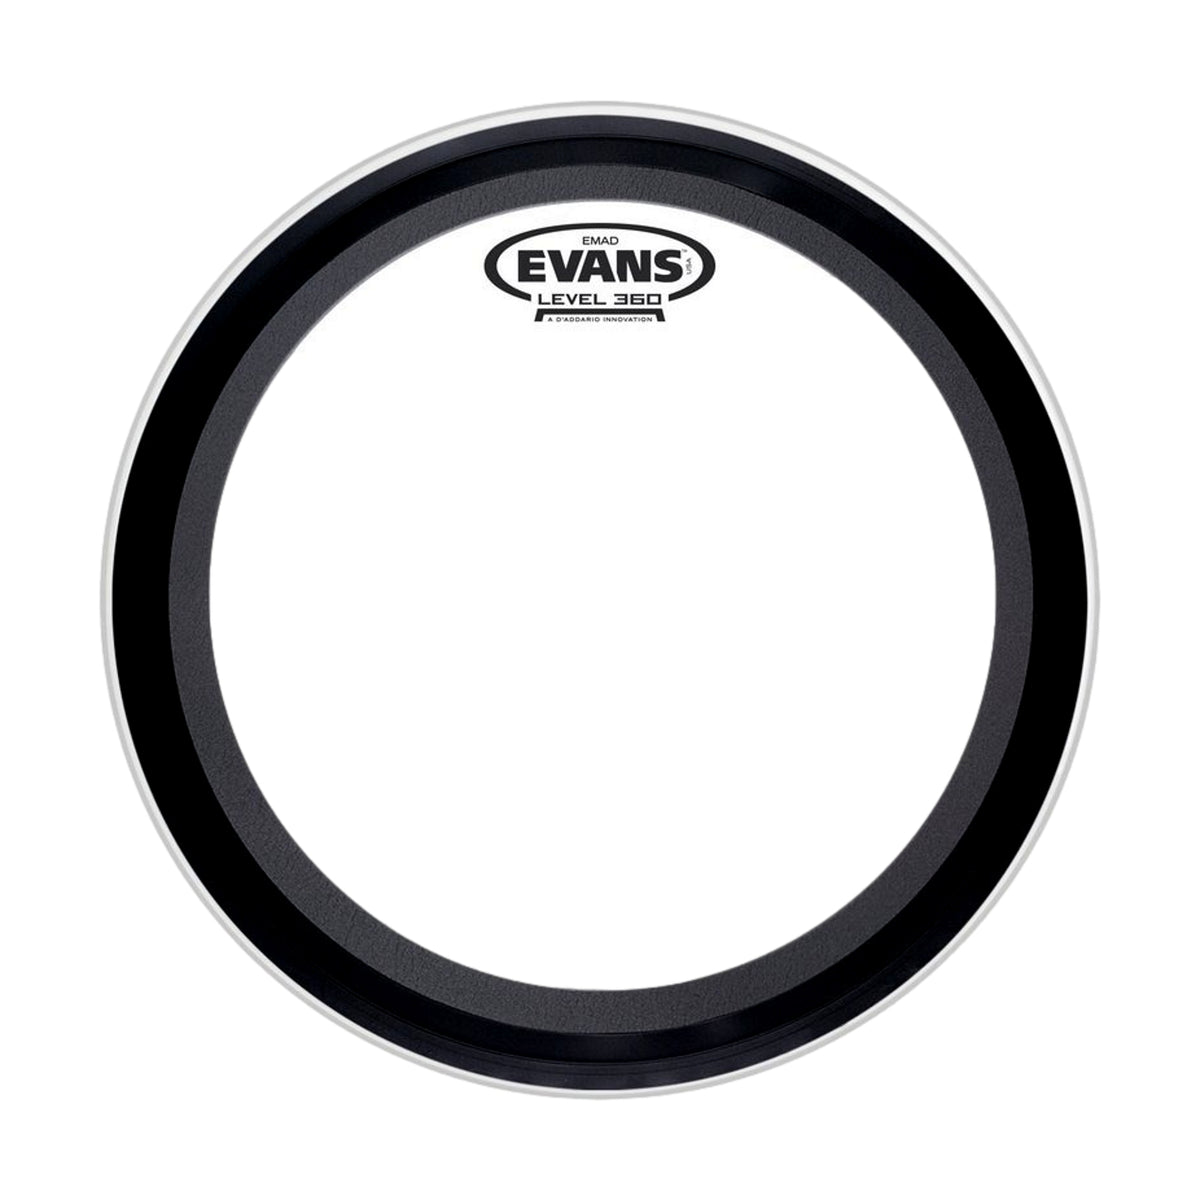 Evans EMAD 26 Inch Bass Drum Head Clear